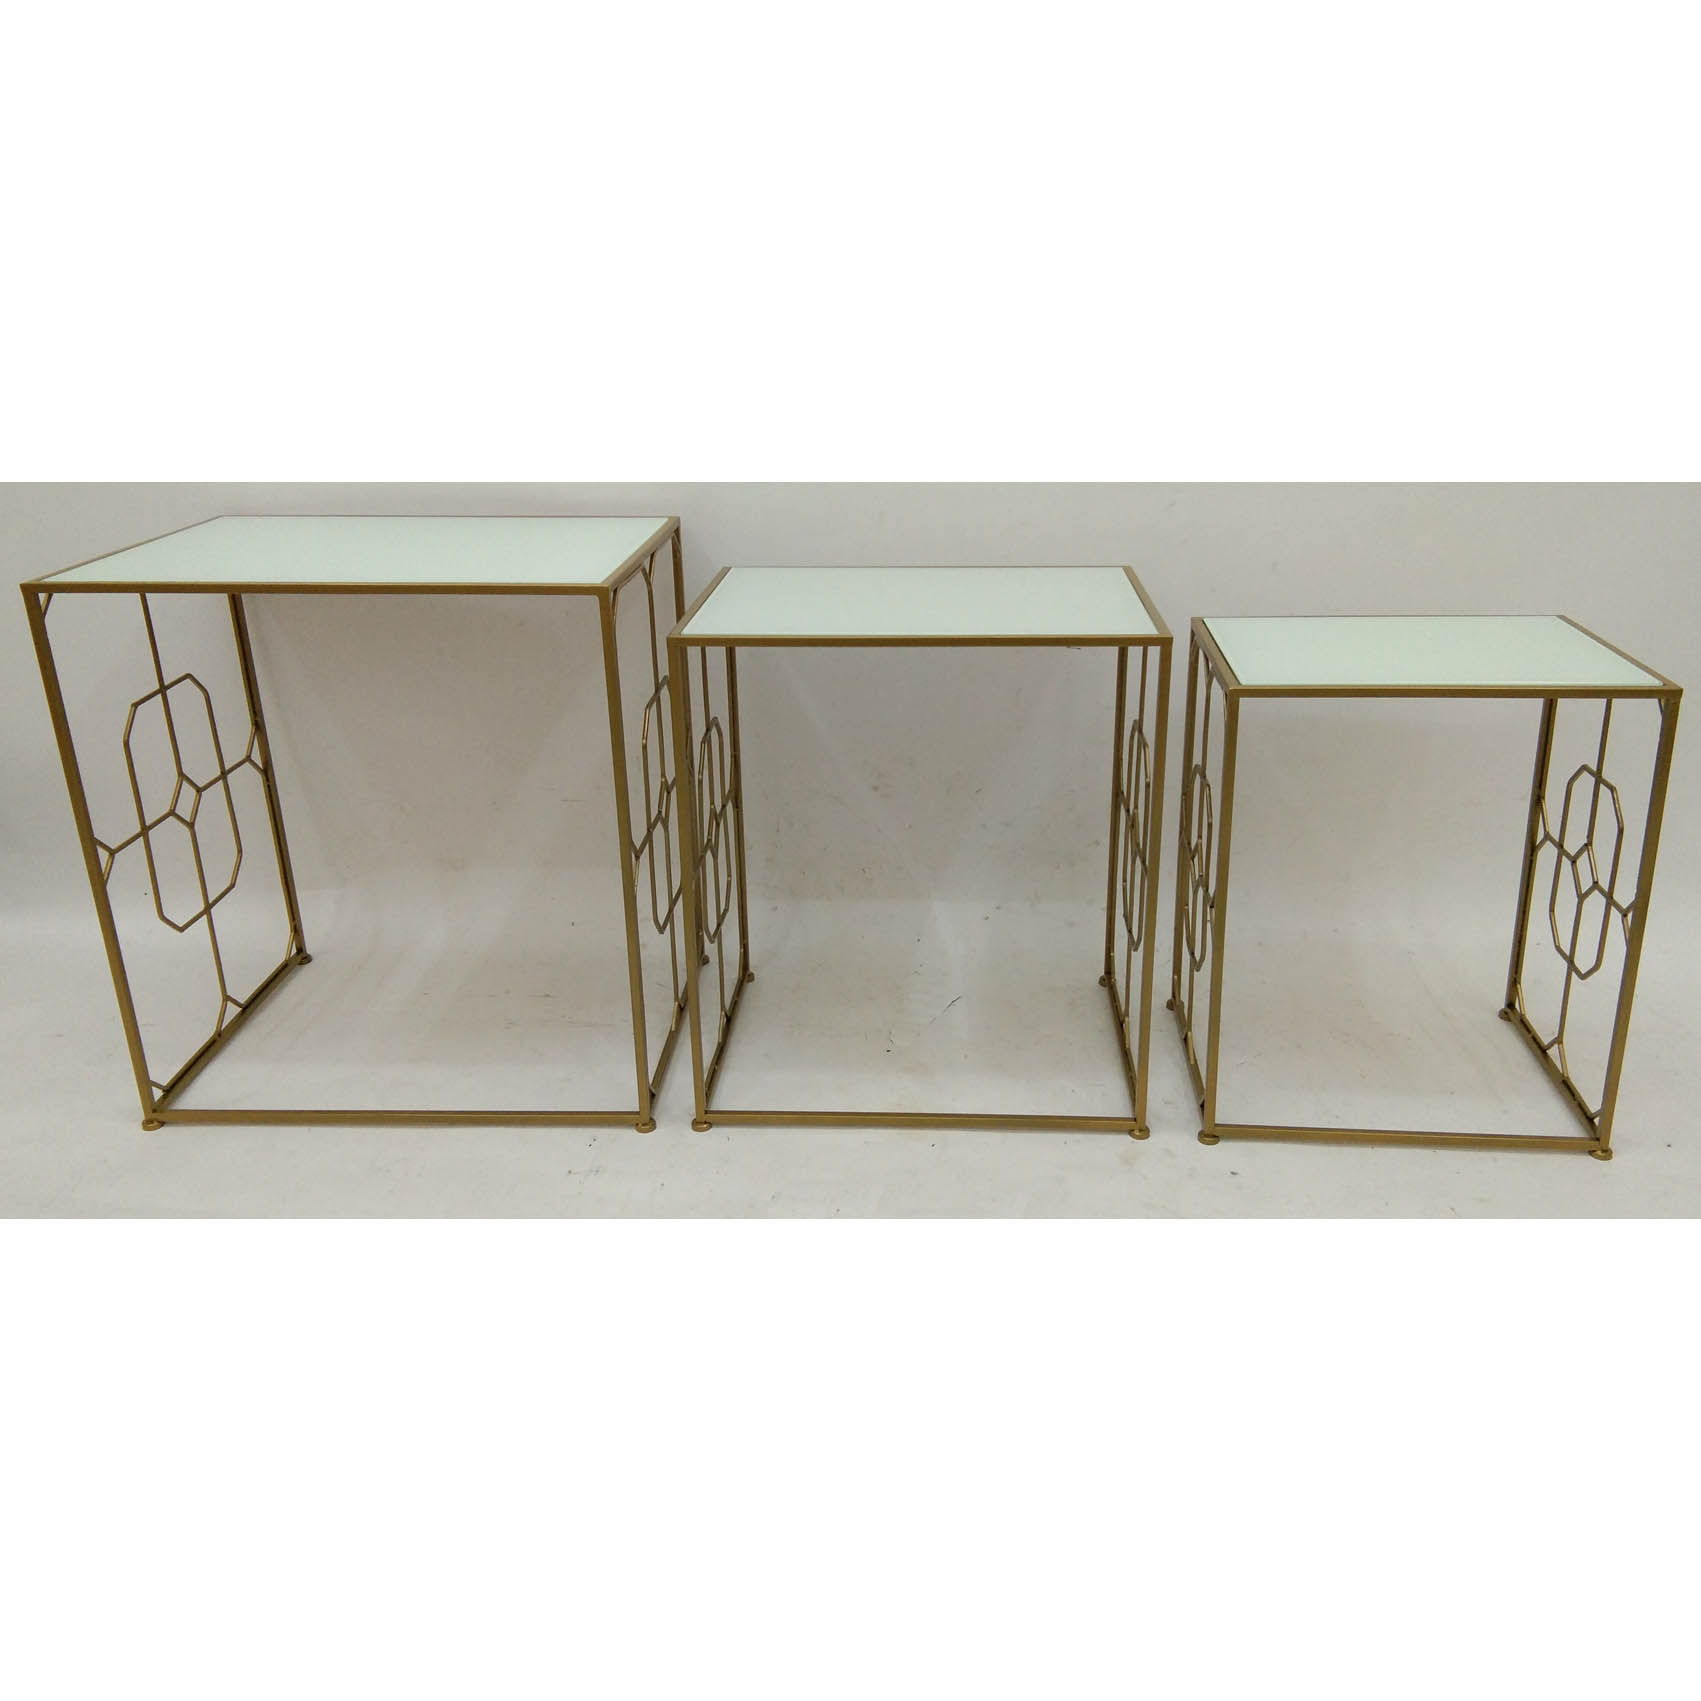 S/3 gold rectangular metal nesting side table with white glass top and geometric metal side decor